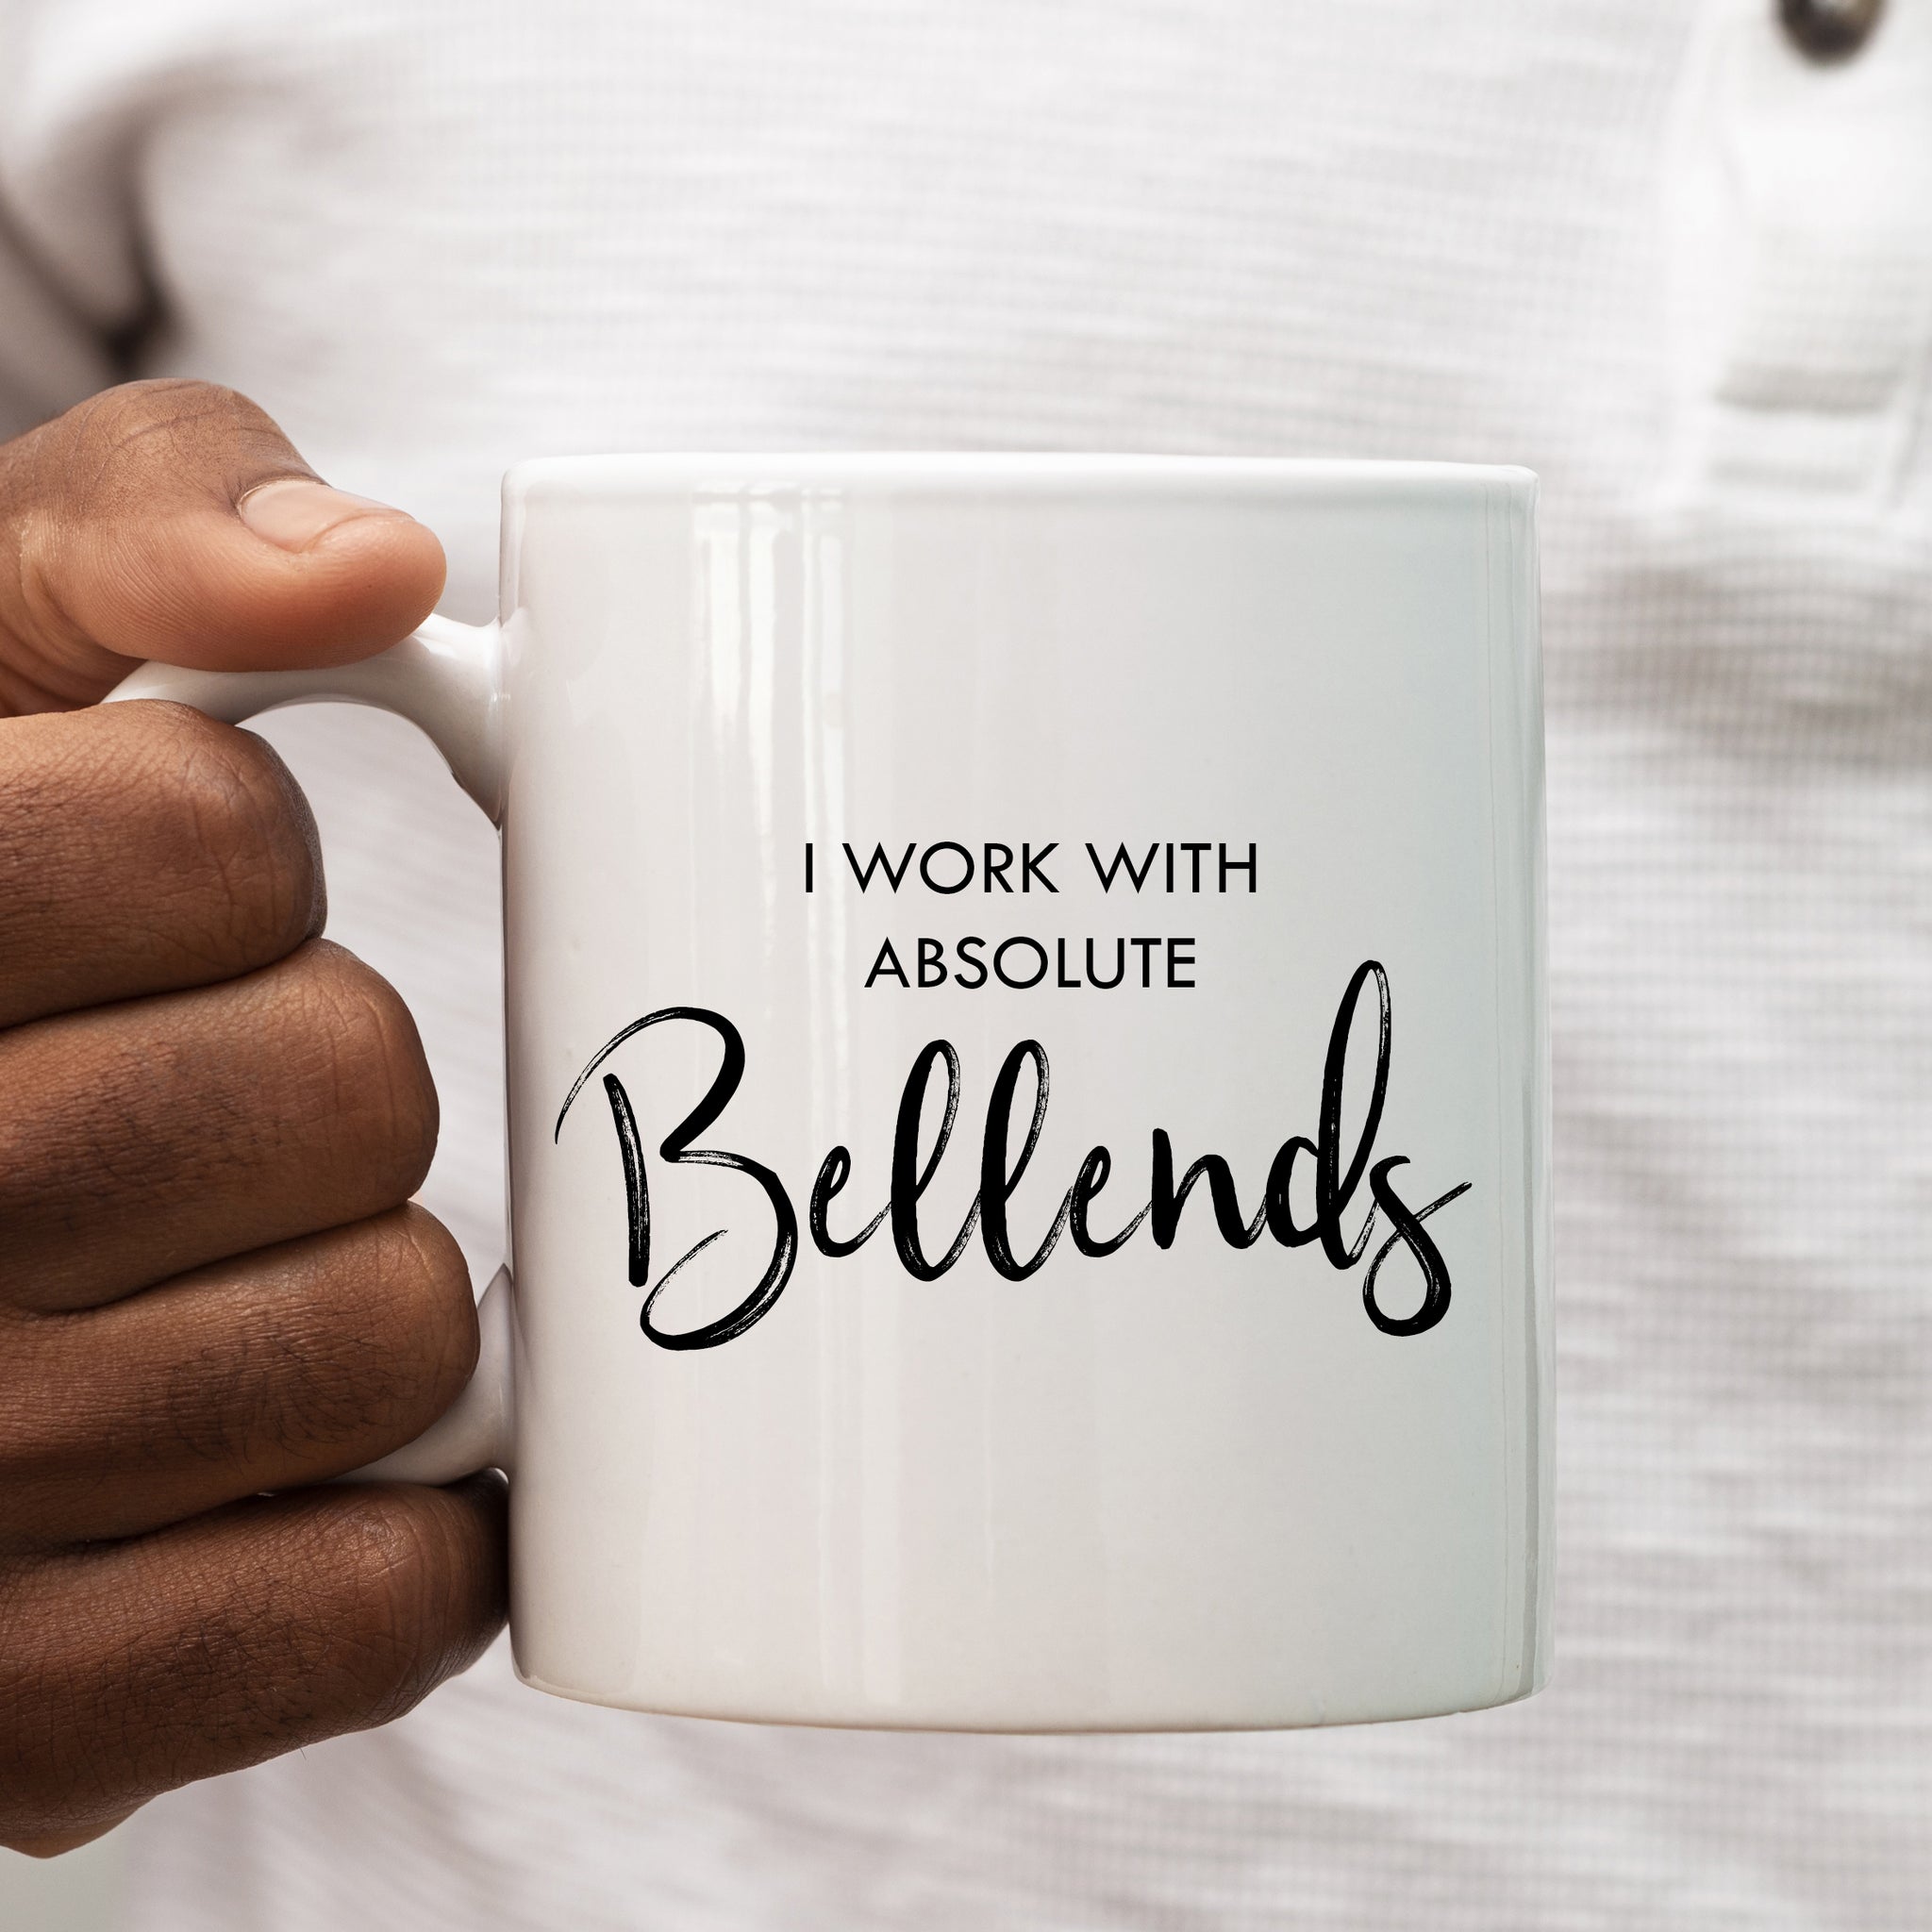 I Work With Absolute Bellends, Funny Gift Work Leavers Happy Birthday Mug for Men or Women